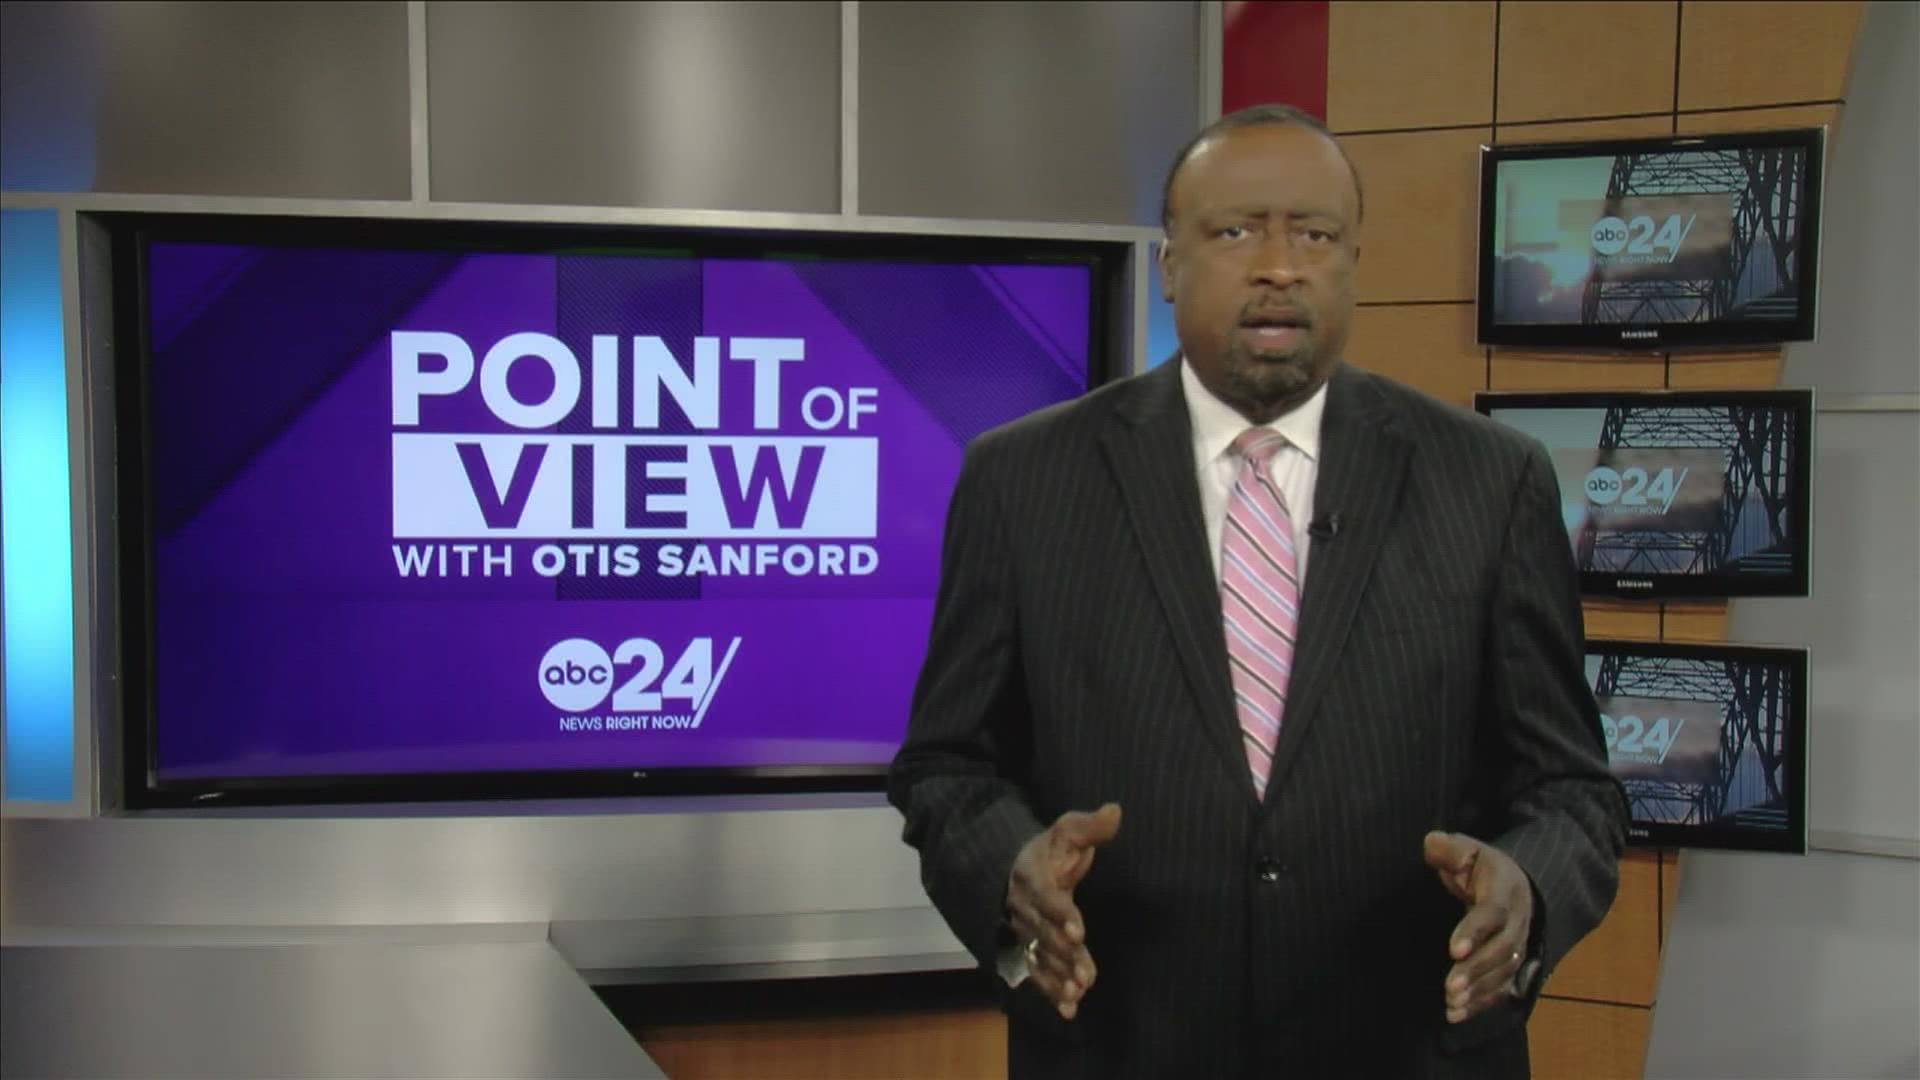 ABC 24 political analyst and commentator Otis Sanford shared his point of view on the state including $20 million for the Memphis riverfront.